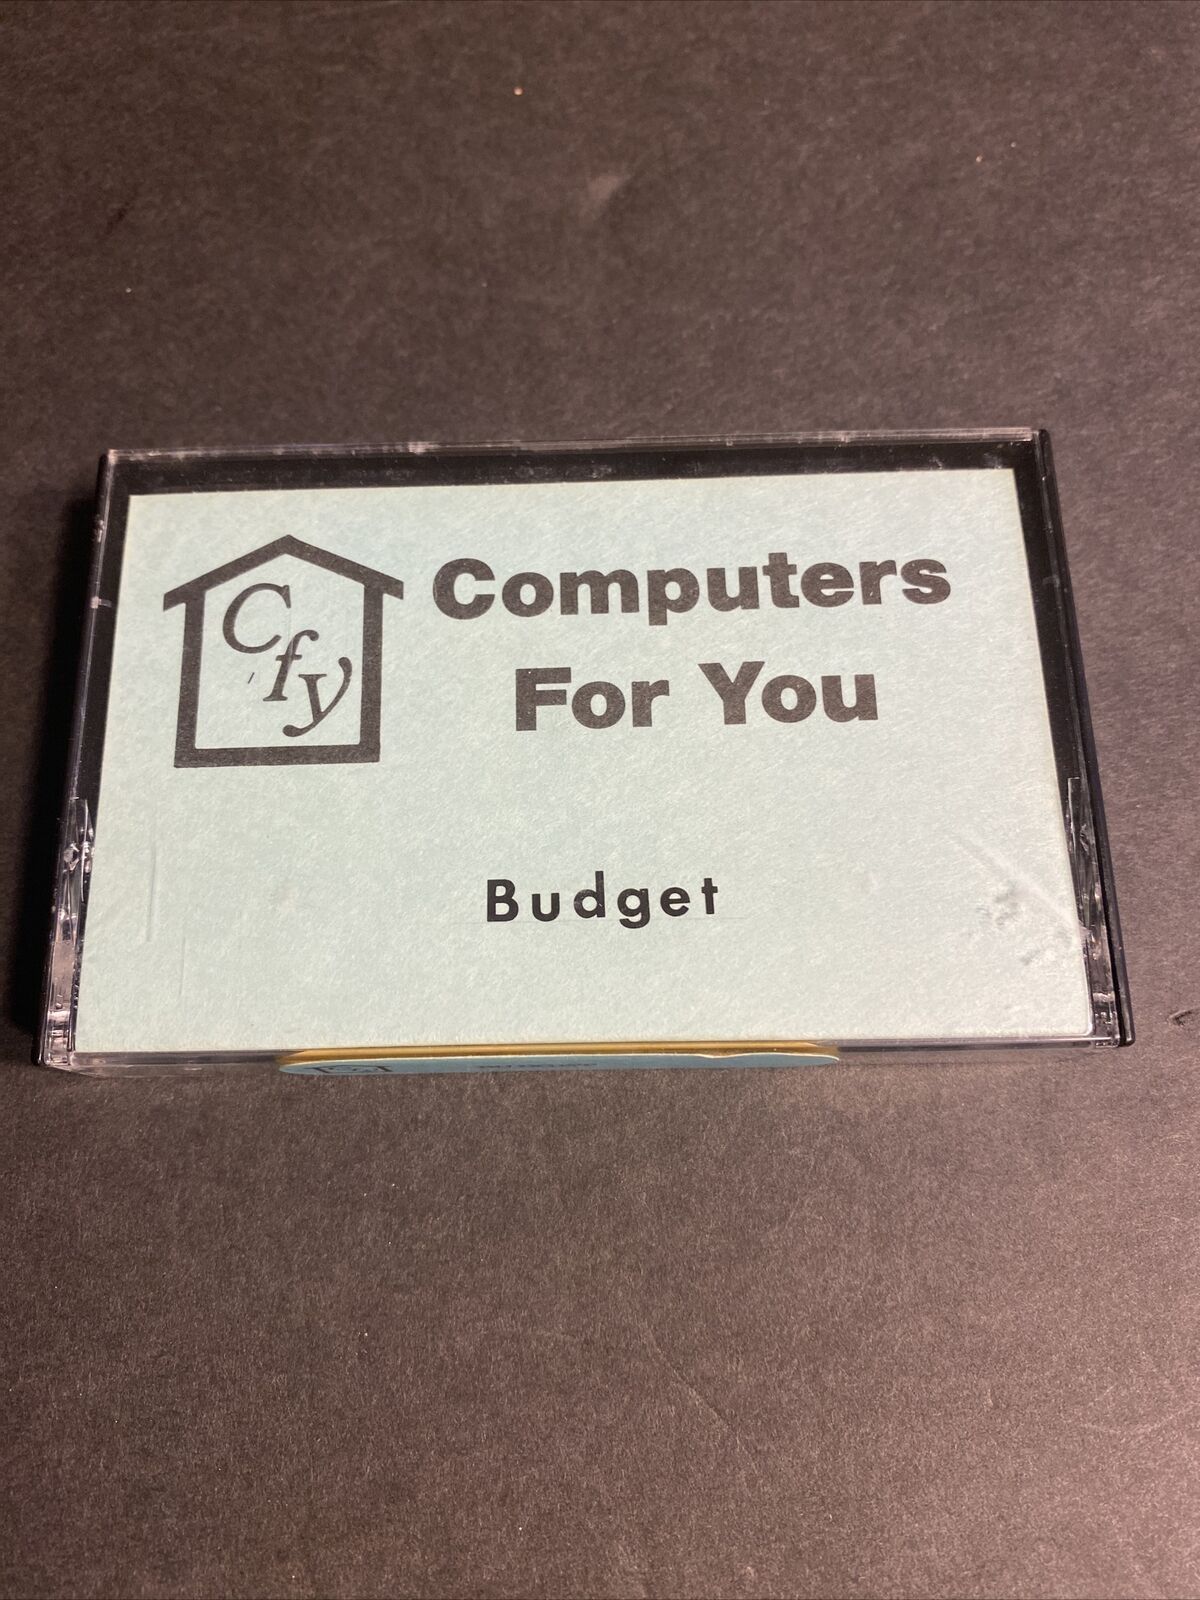 VIC-20 Budget - Computers For You - Cassette Commodore Vic 20 Game